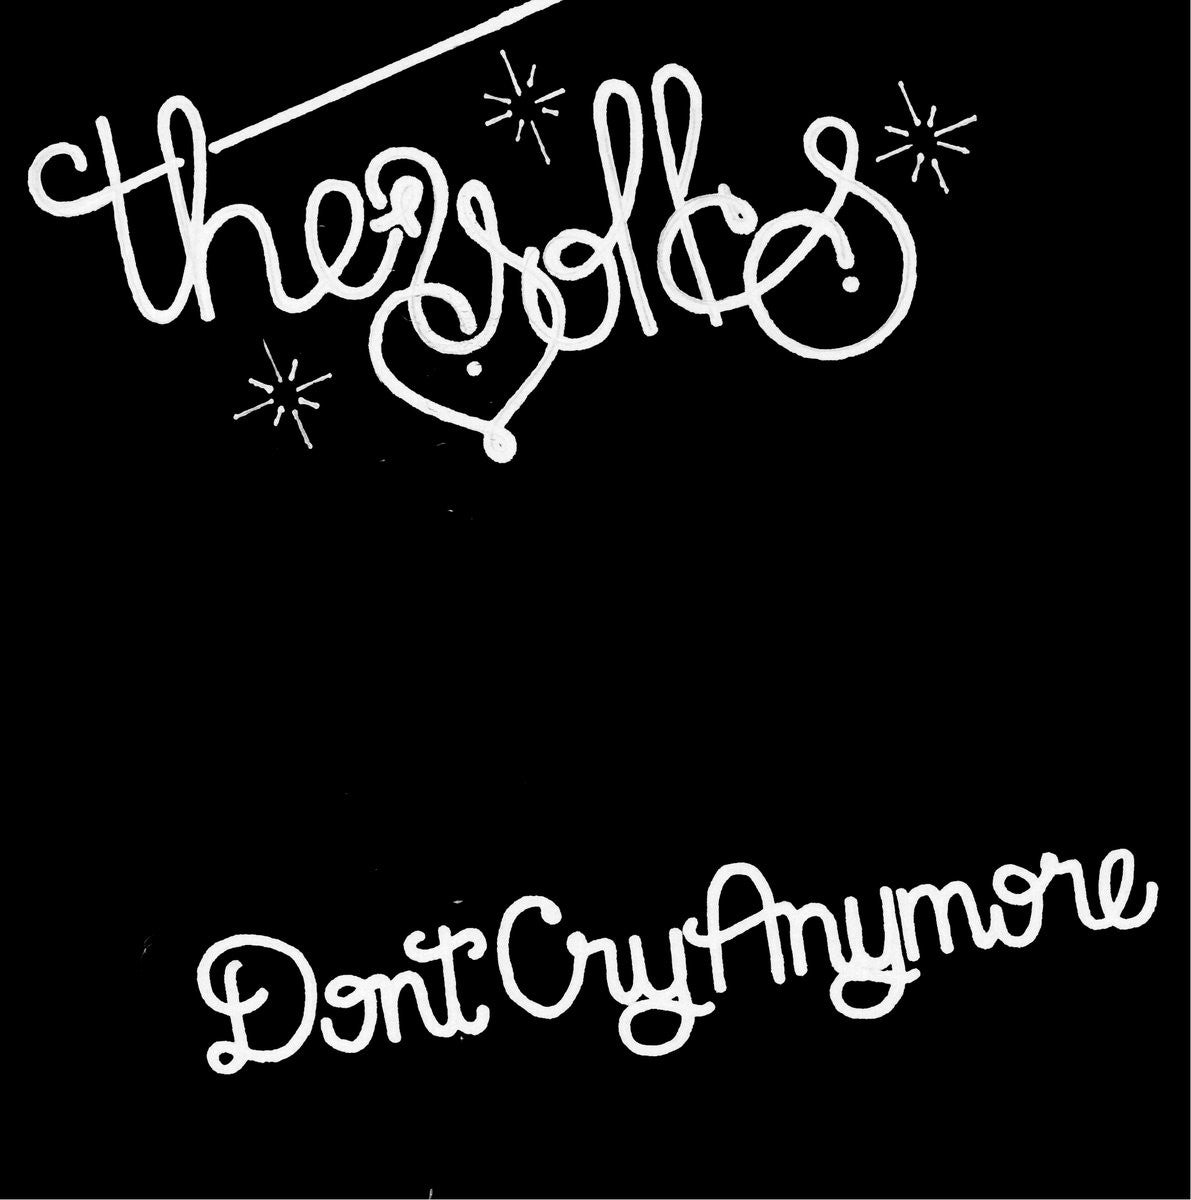 The Yolks - Don'y Cry Anymore / I Wanna Be Dumb - New Vinyl Record - 7" Single - 2015 Bachelor Records - Chicago / Punk / Garage